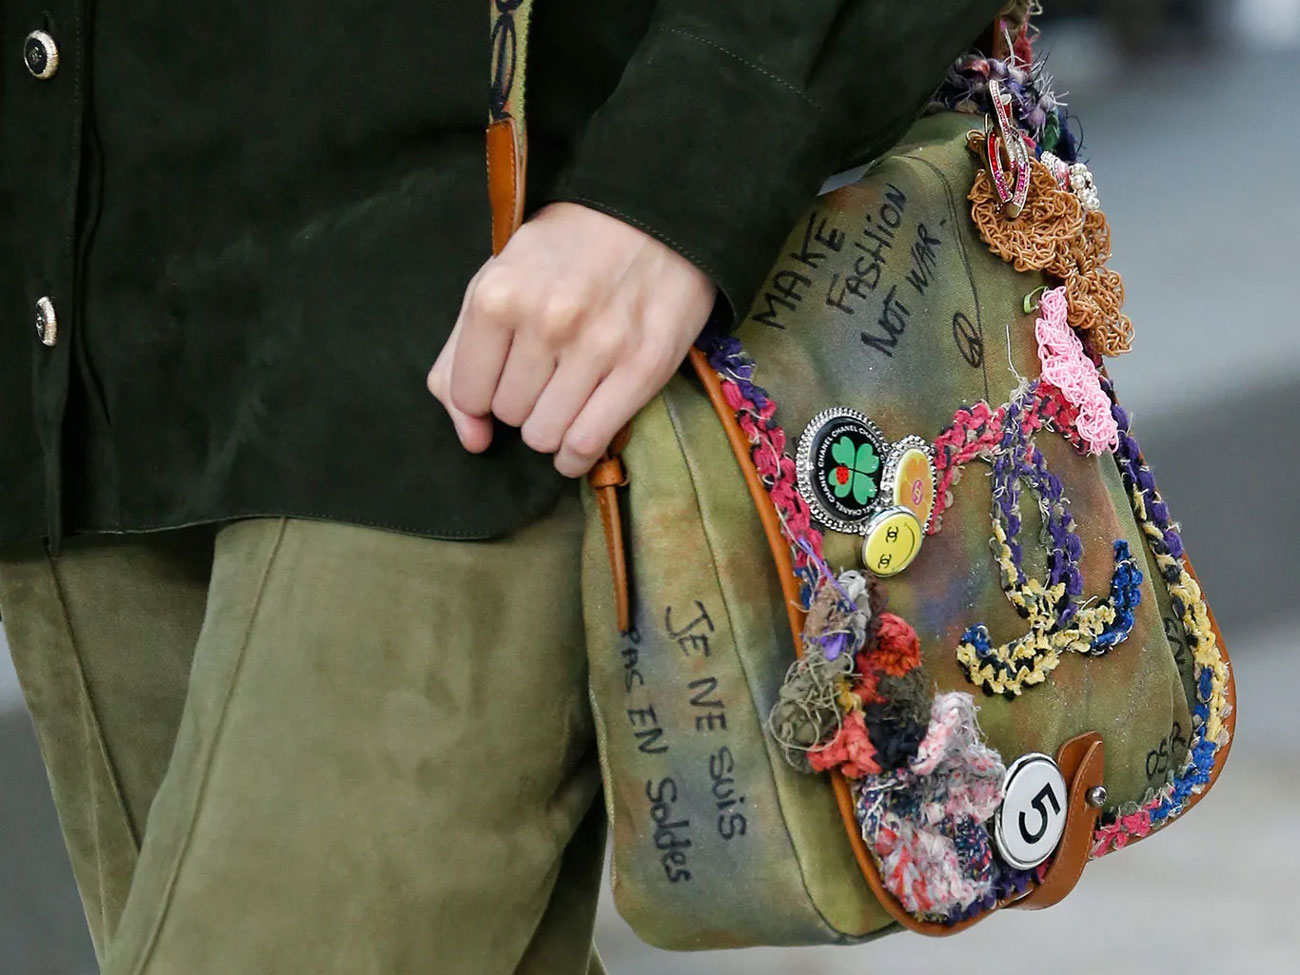 Vintage designer bags that are making a comeback in 2023